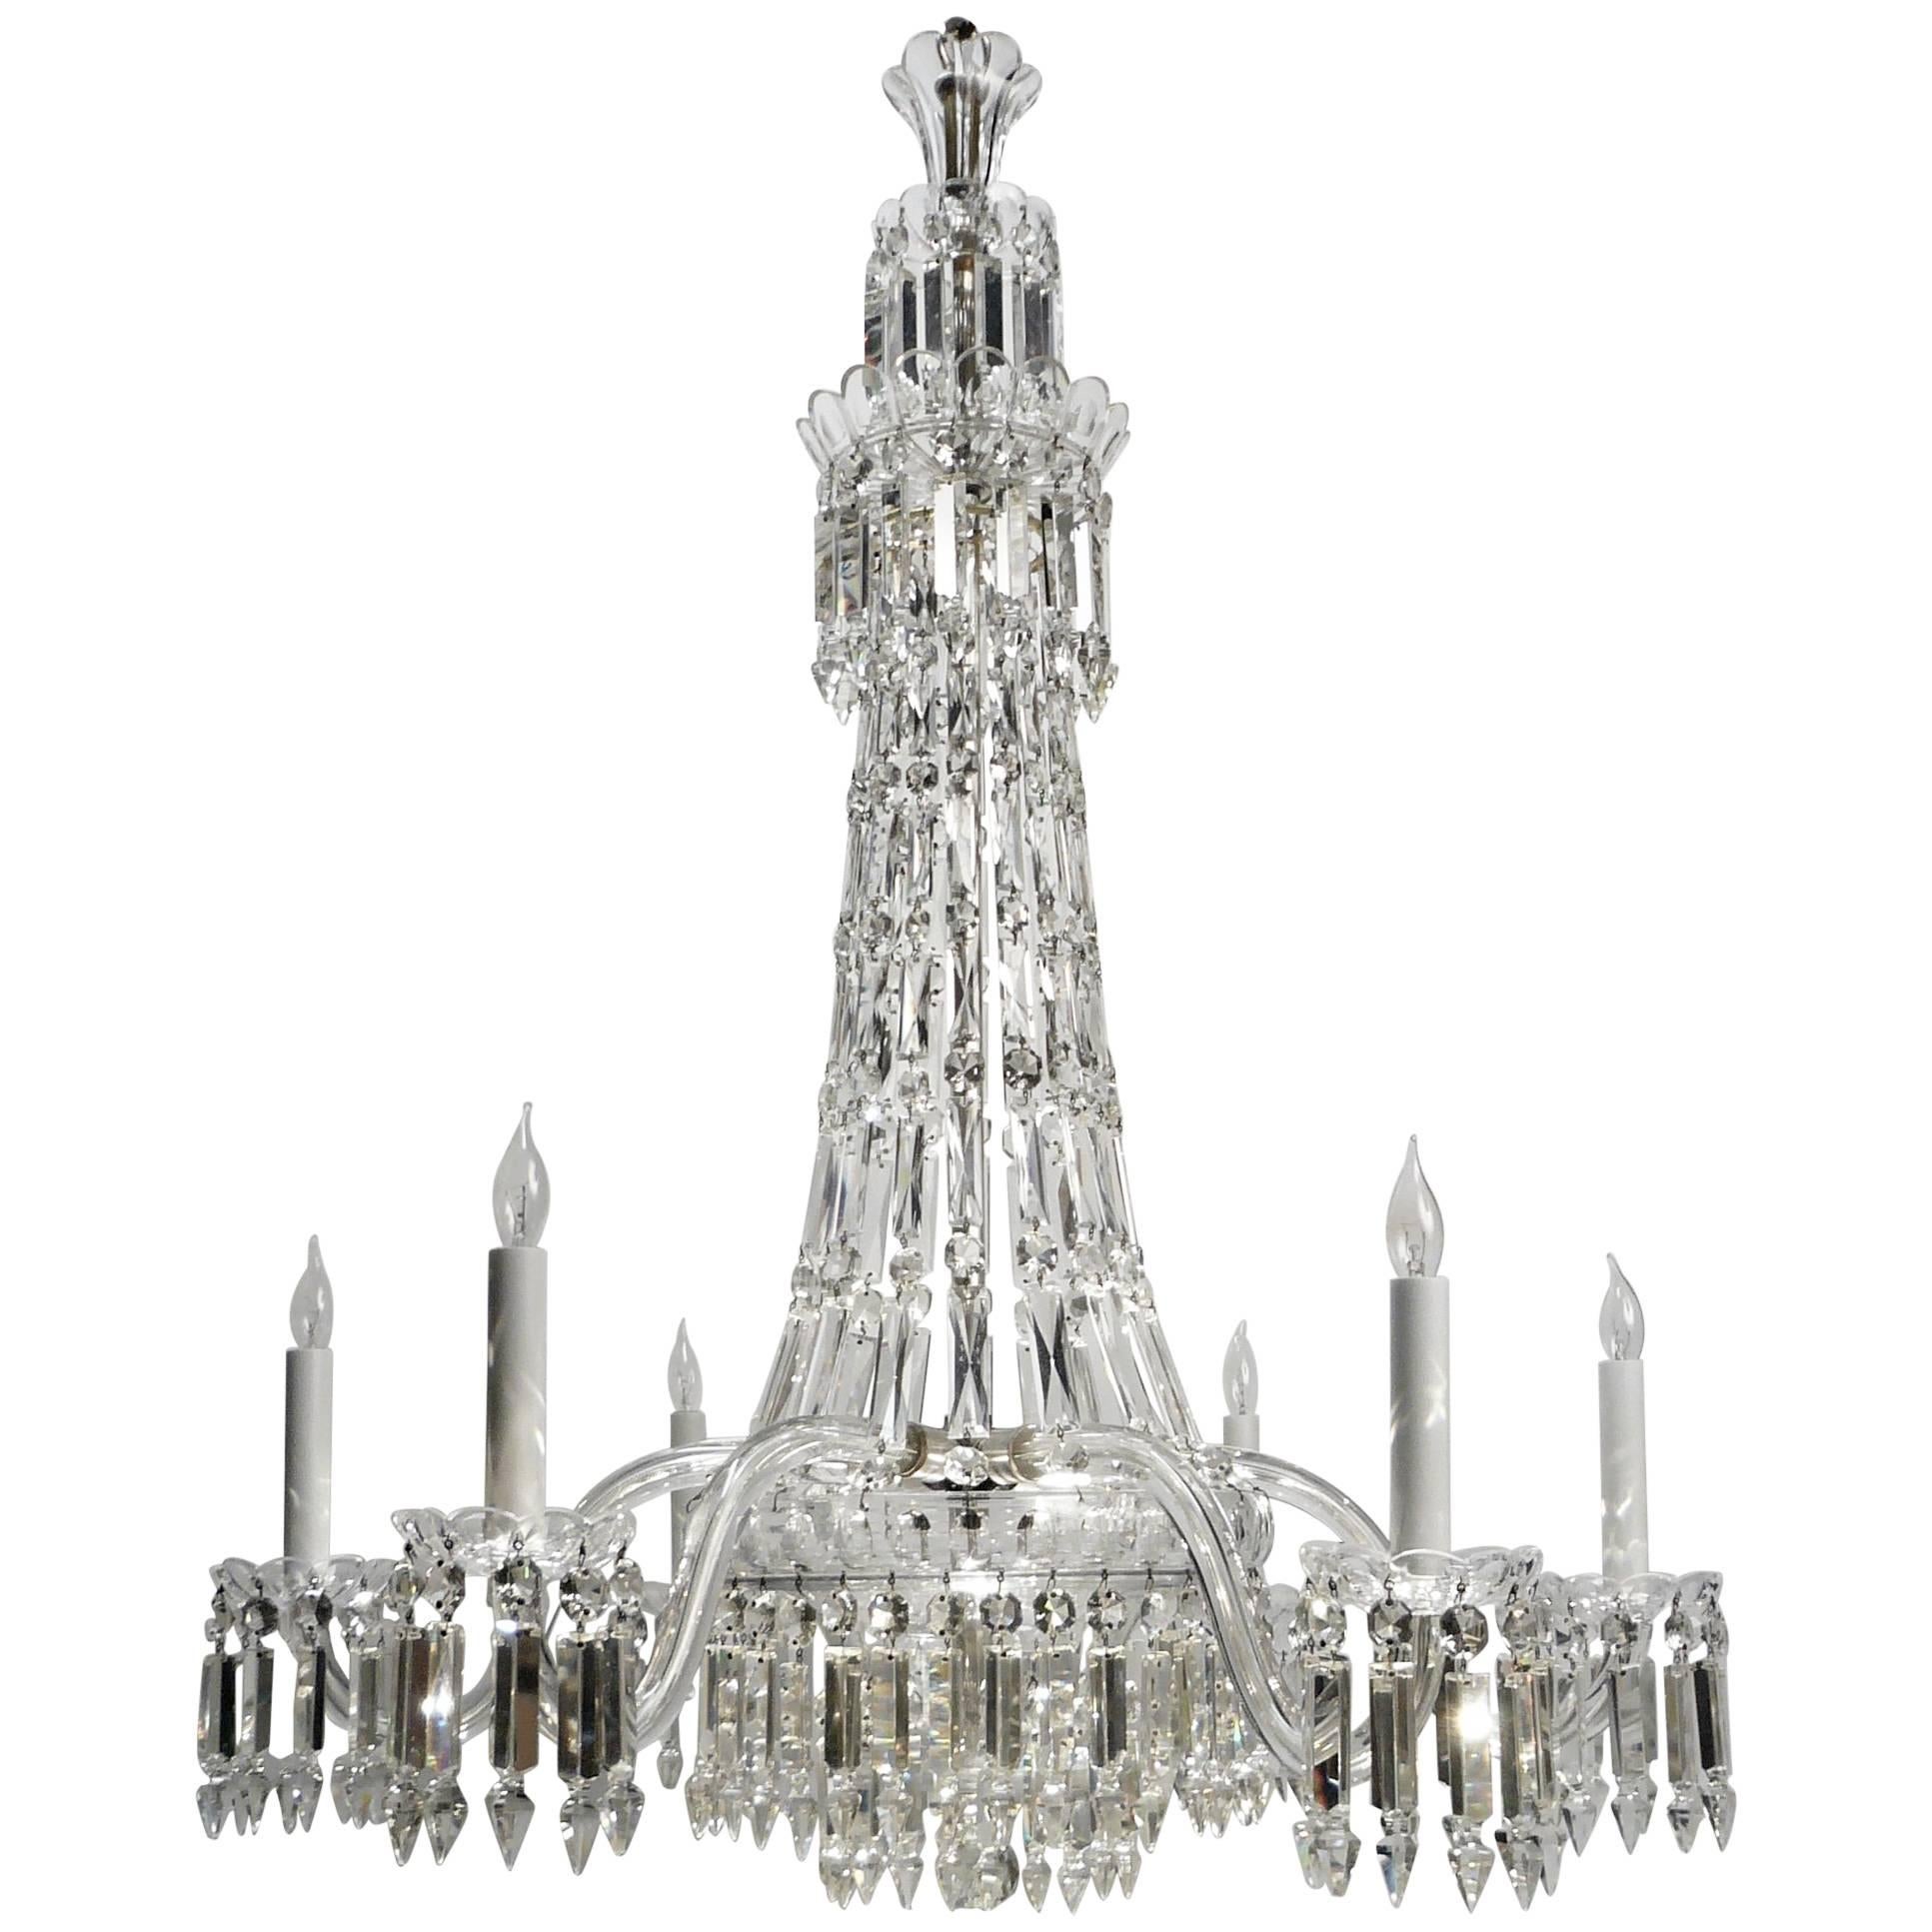 19th Century English Crystal Chandelier by F & C Osler